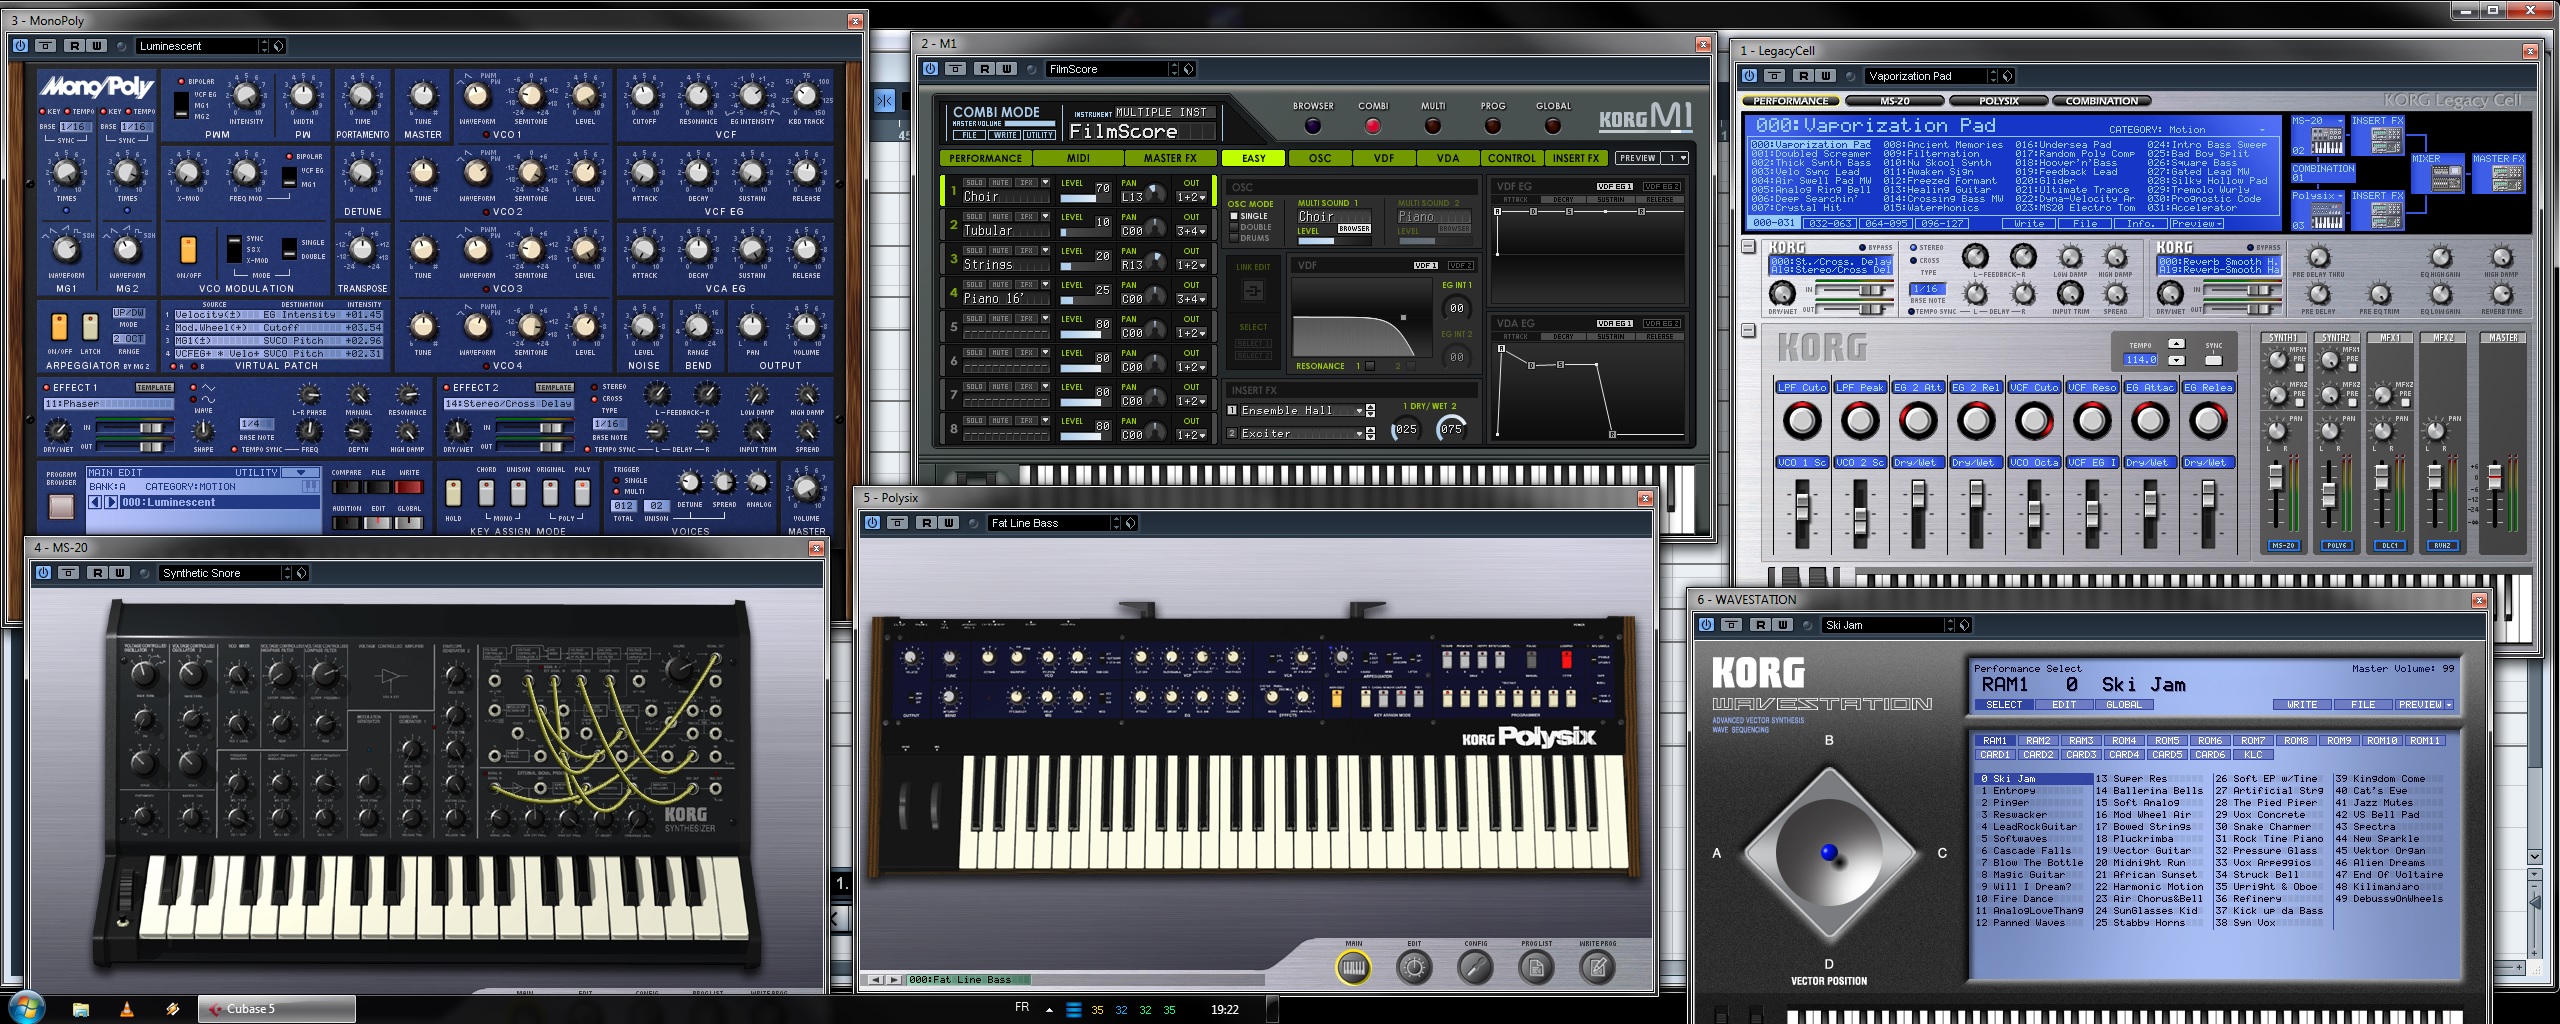 korg legacy collection download mac